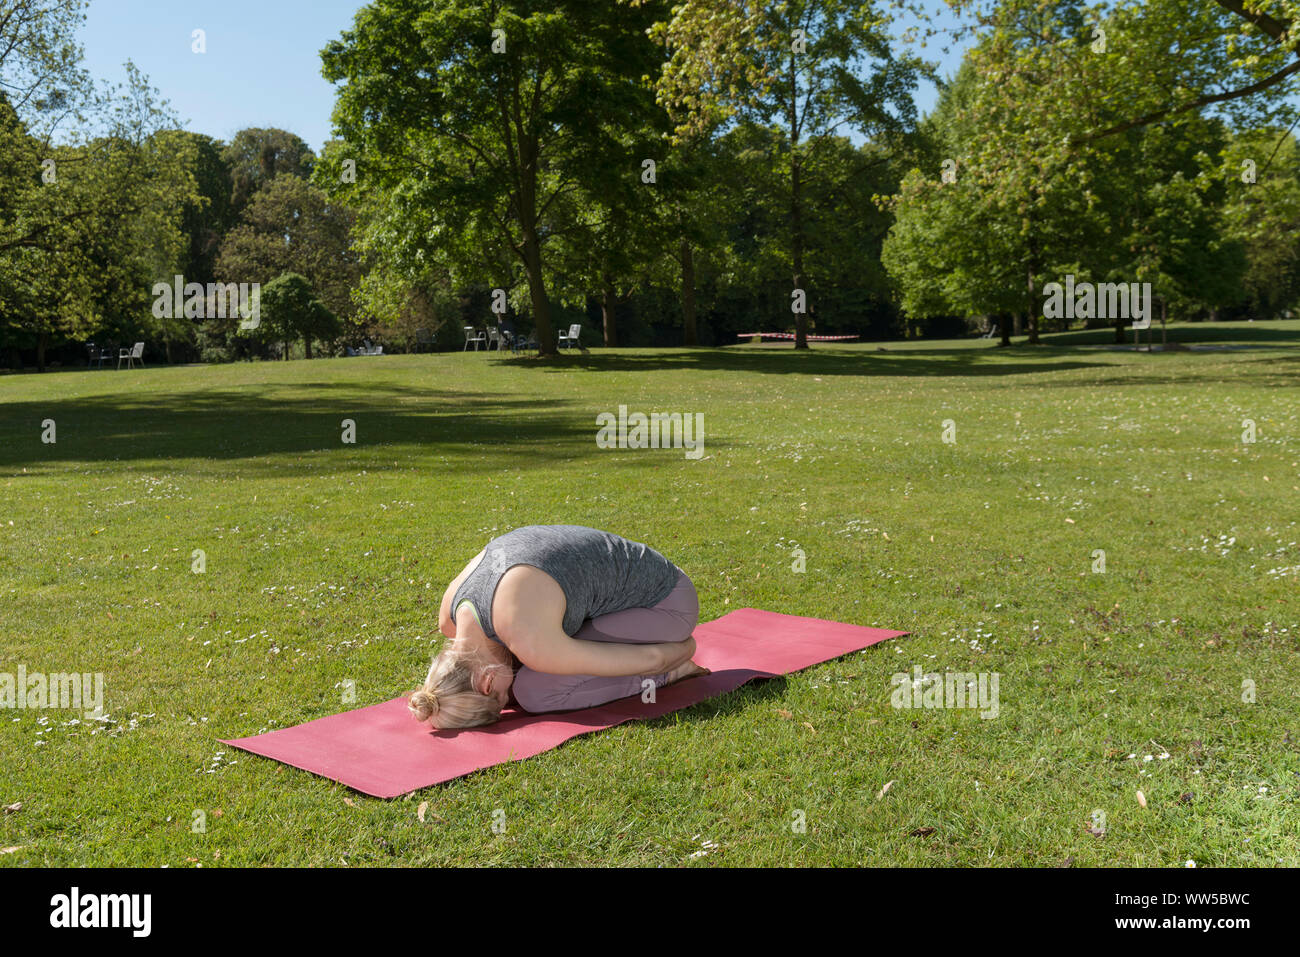 Woman in training clothing on pink mat in the park, yoga practise Stock Photo